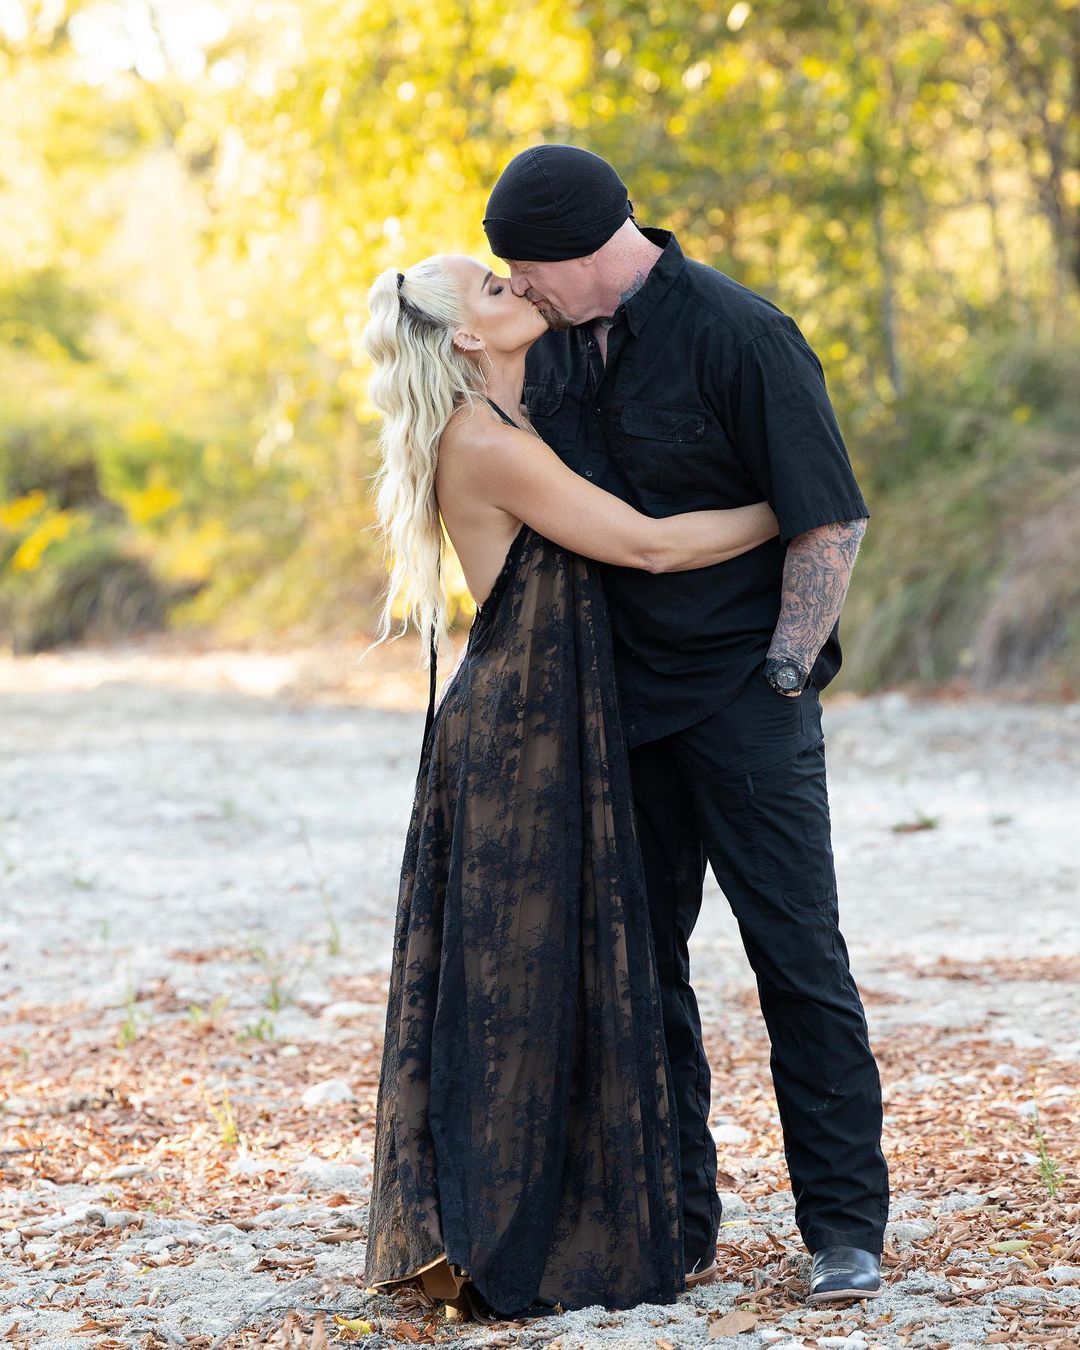  Michelle McCool and Mark Calaway 💞